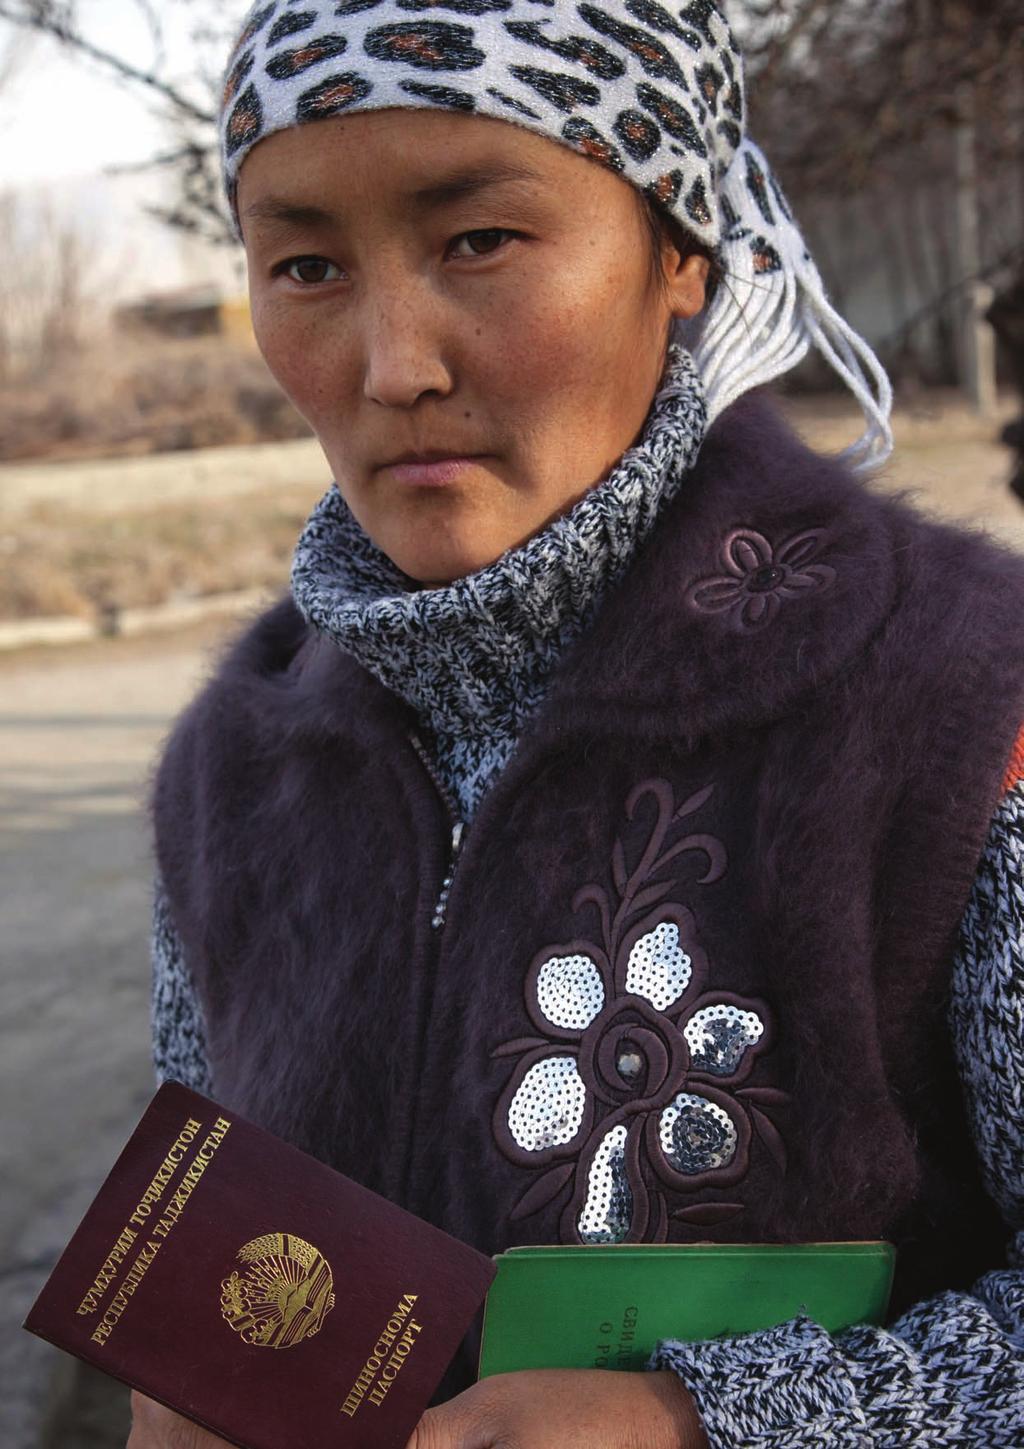 42 UNHCR Global Report 2010 Sadakhan, a formerly stateless mother of 3 children, in